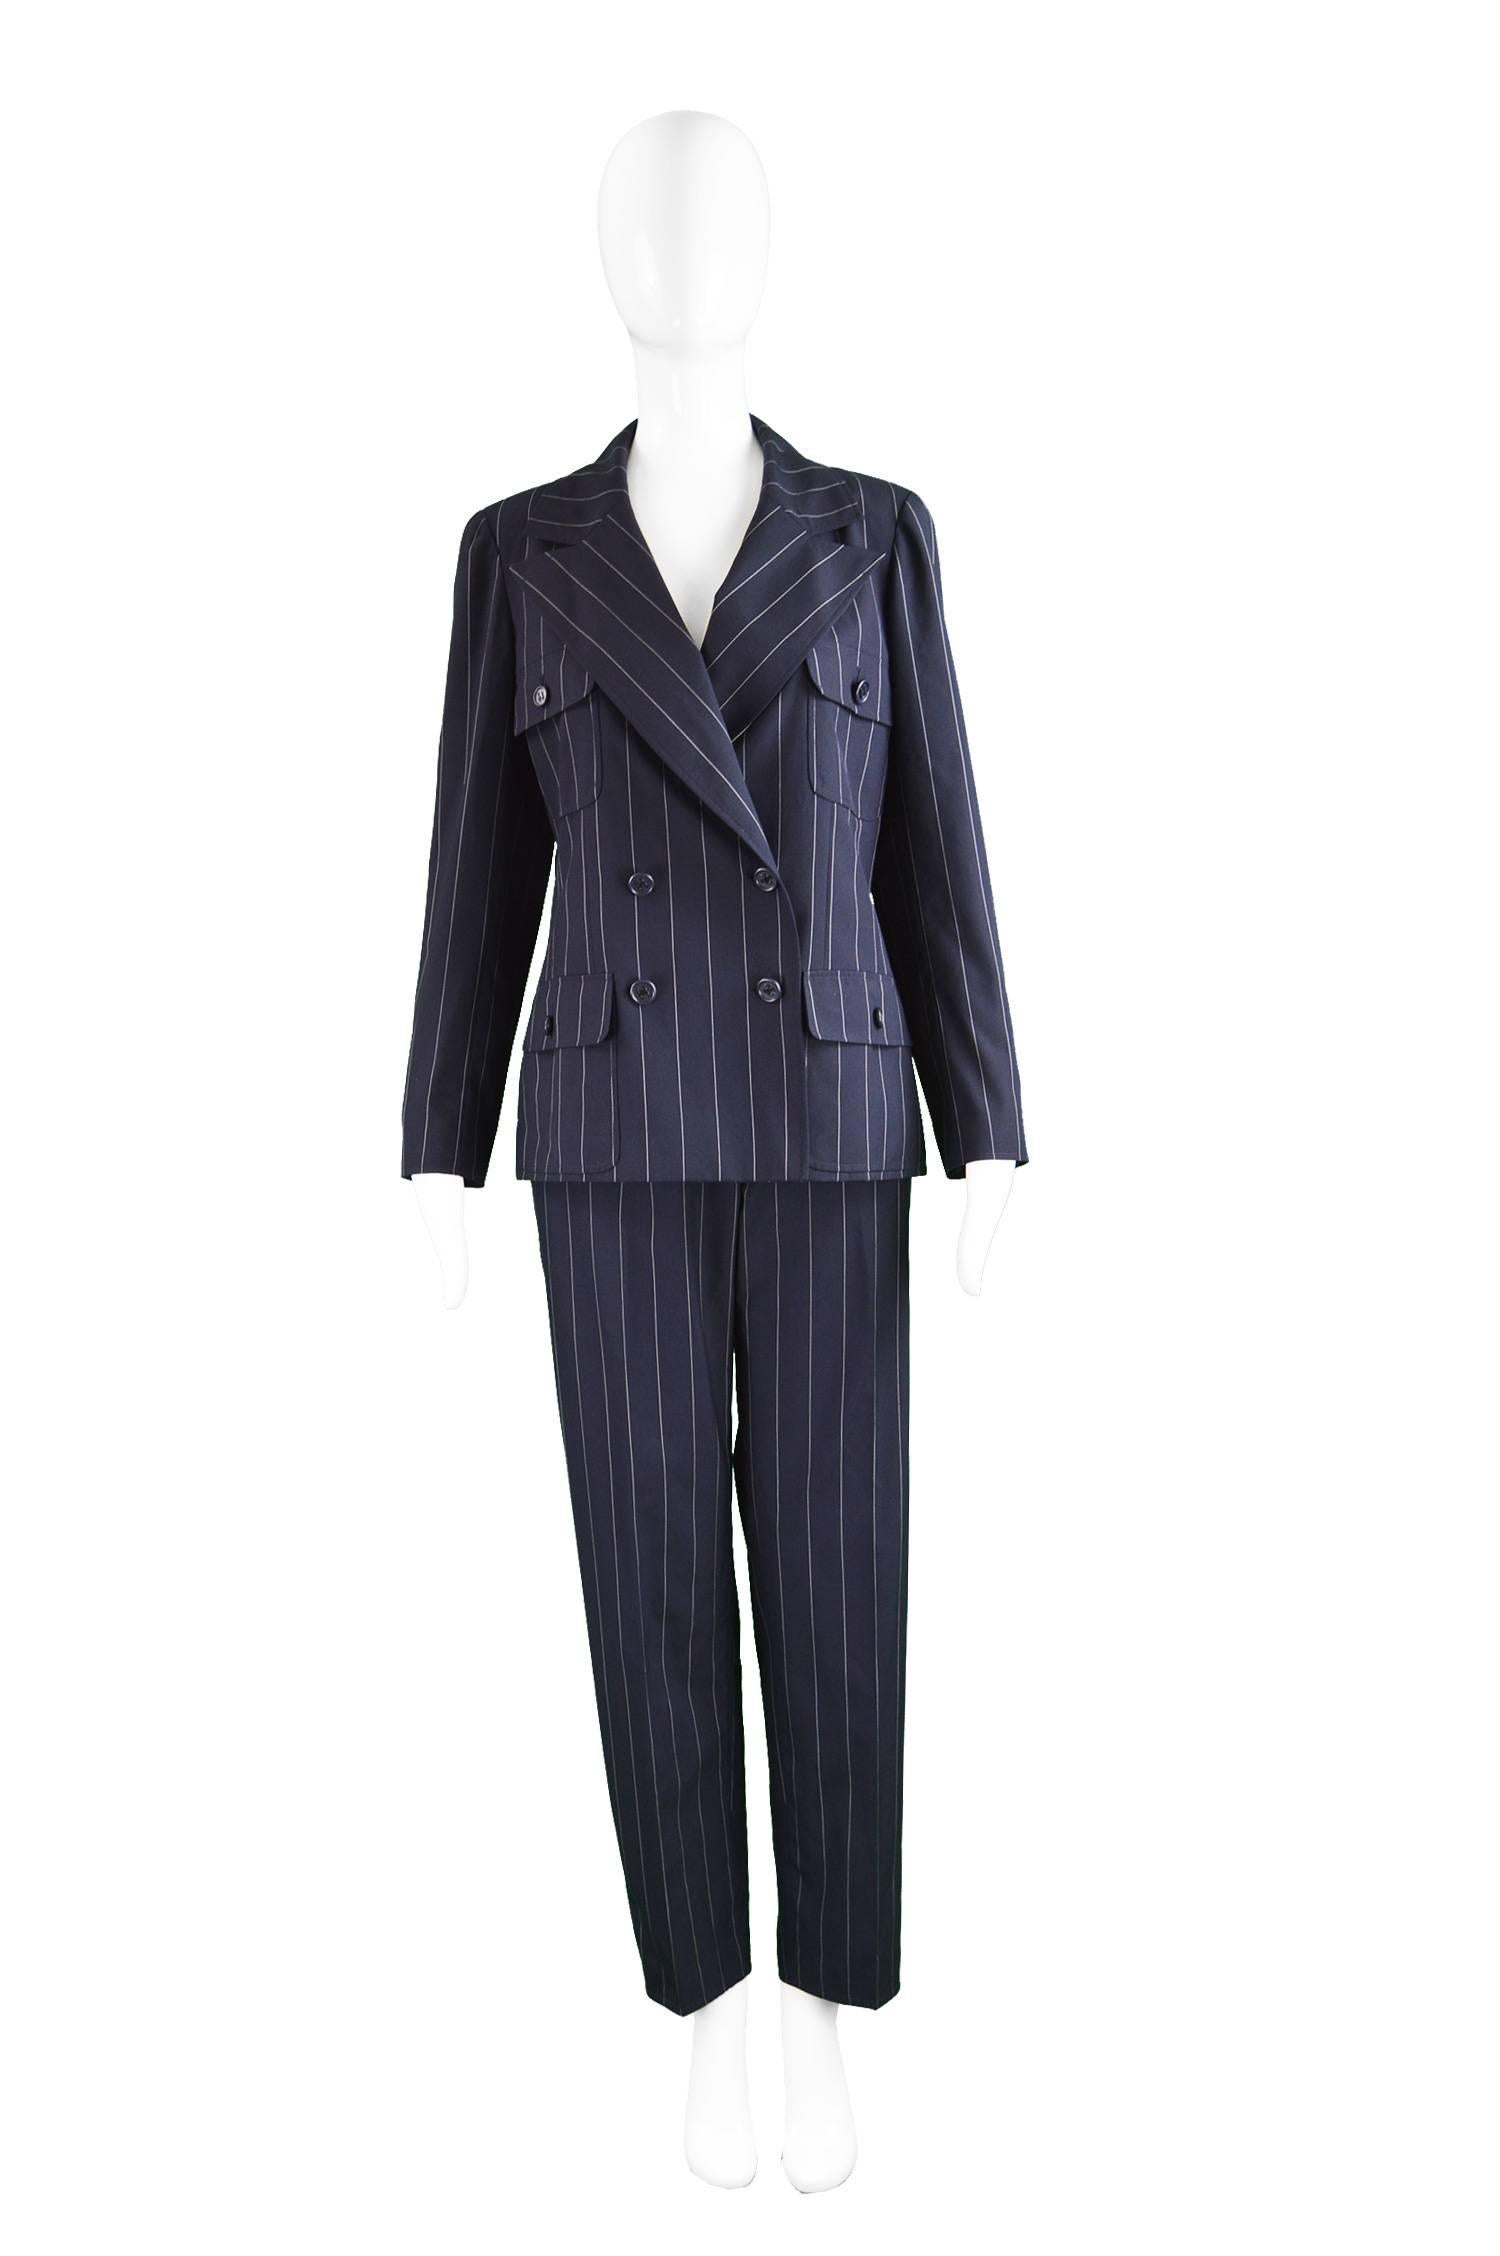 Chanel Womens Vintage Menswear Inspired Pinstripe Pant Suit, S/S 1997

Estimated Modern Size: UK 10-12/ US 6-8/ EU 38-40. Please check measurements.
Jacket
Bust -38” / 96cm (please remember to leave a couple of inches room for movement)
Waist - 34”